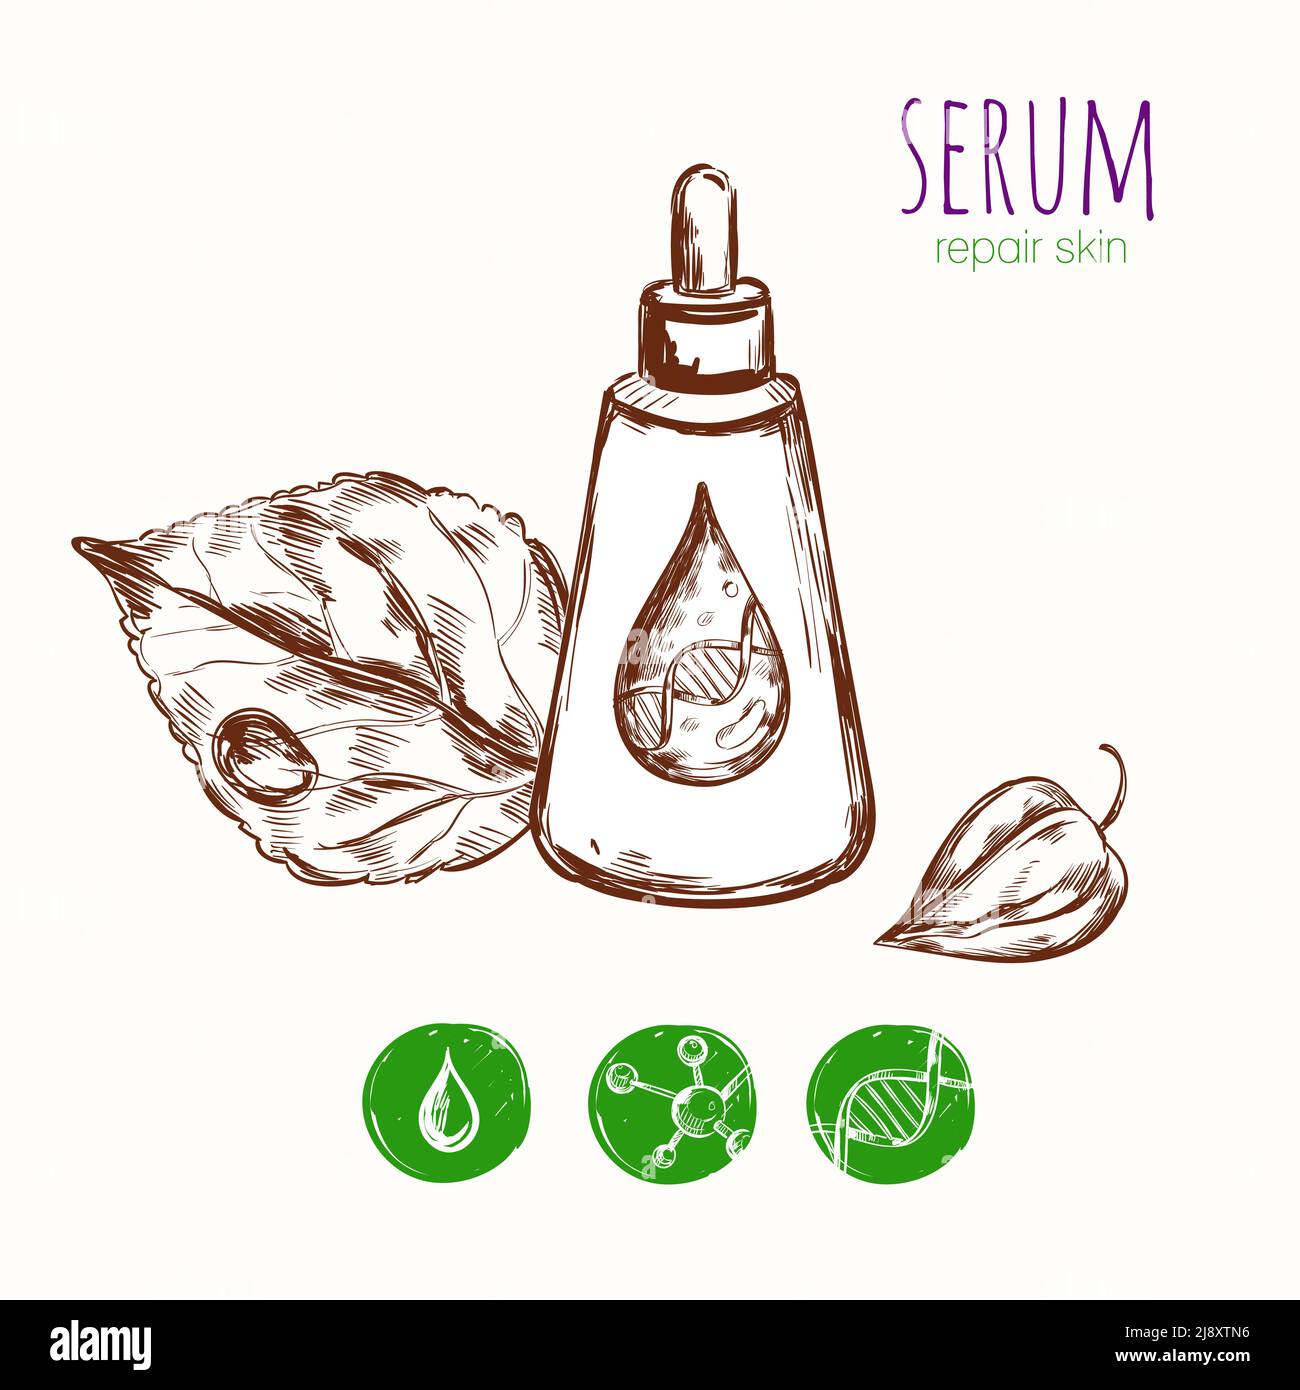 Serum cream skin repair concept with sketch images of package leaves detailed drop and molecule icons vector illustration Stock Vector